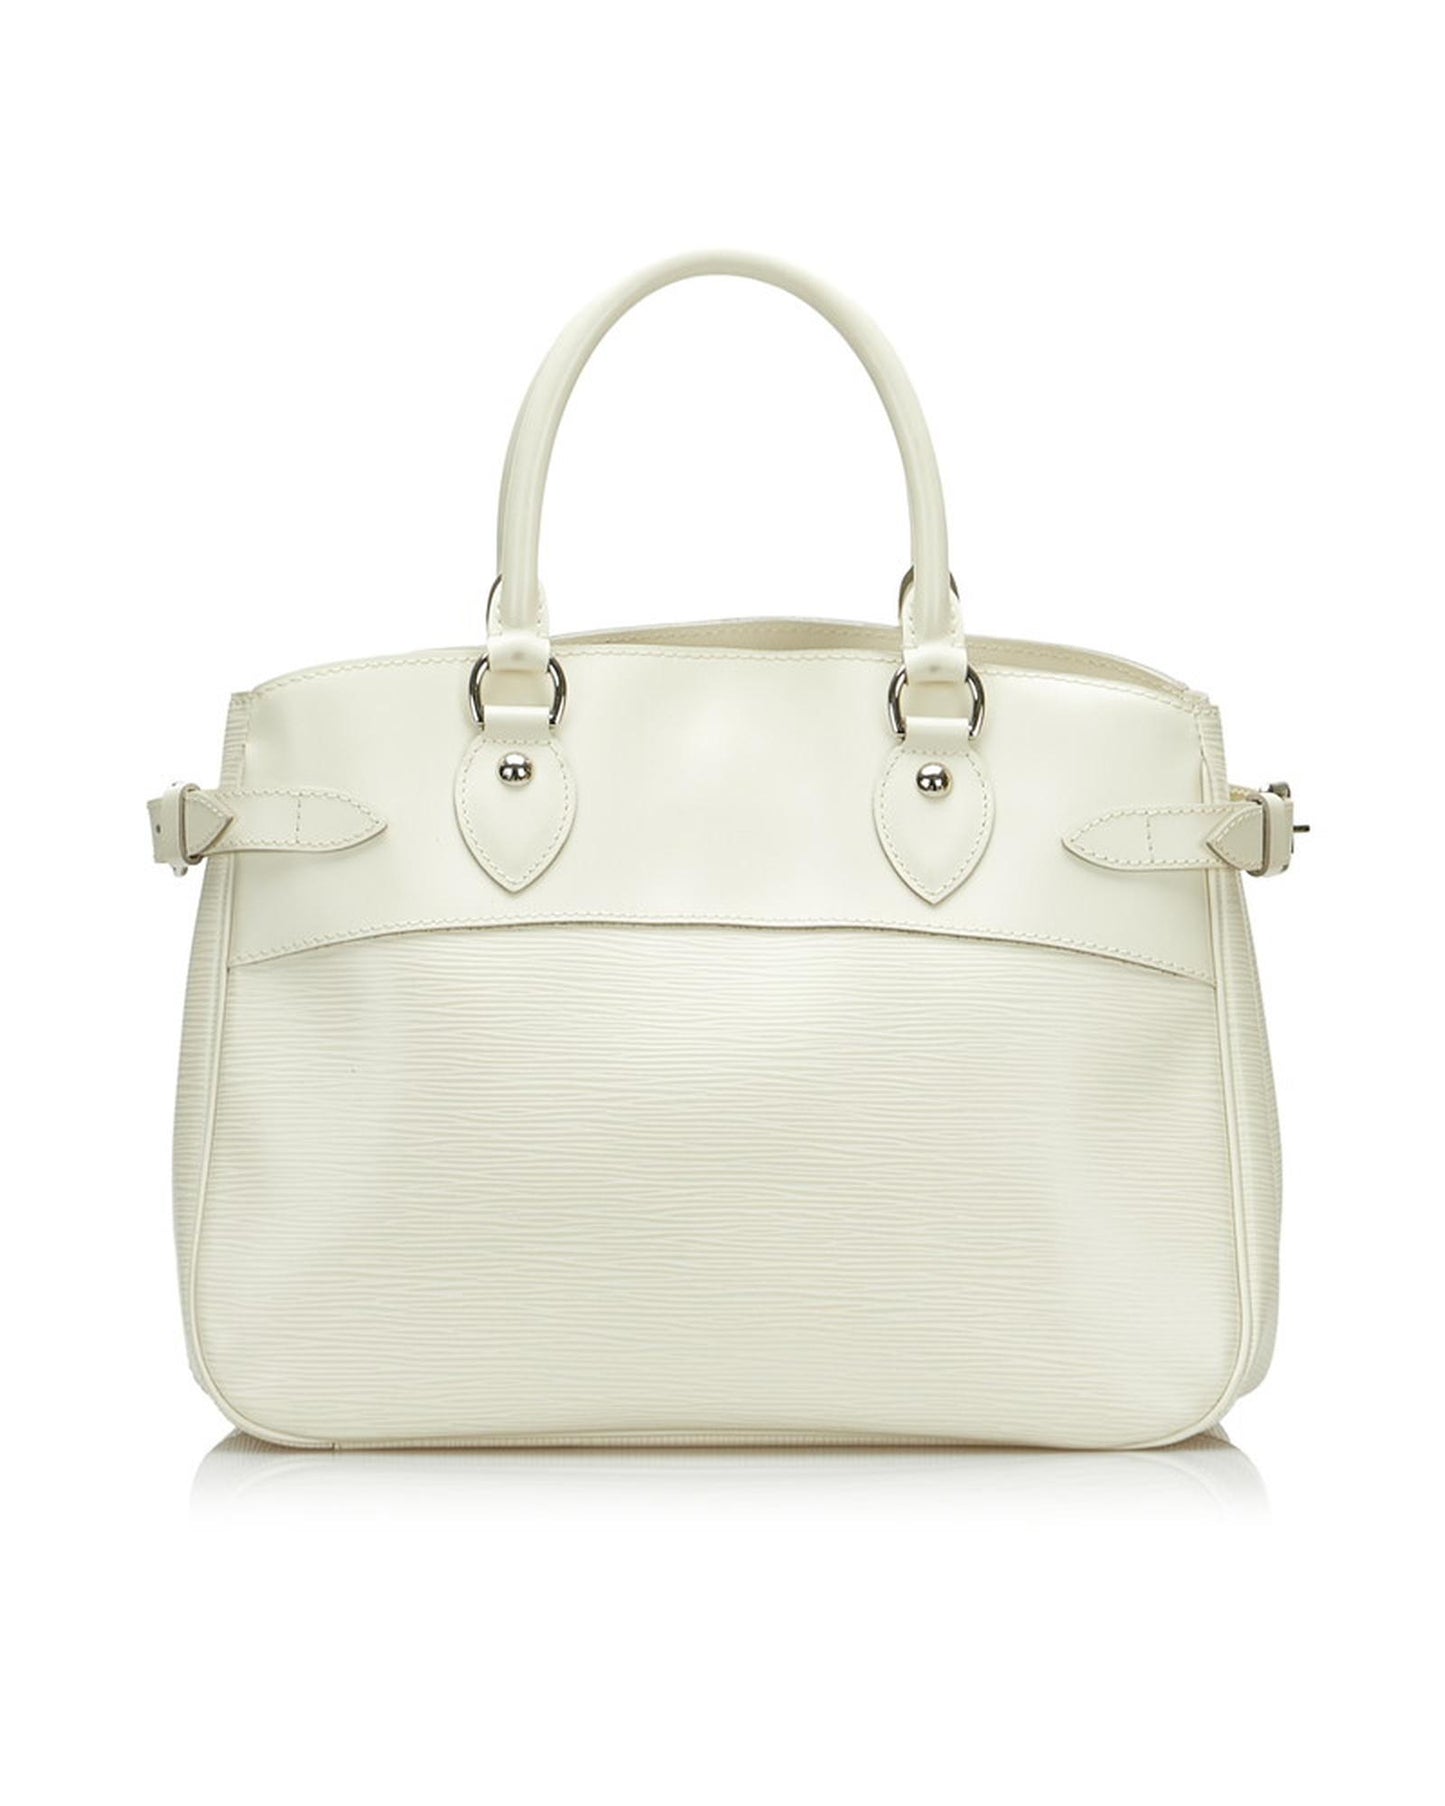 Louis Vuitton Women's White Epi Passy PM Bag in Excellent Condition in White